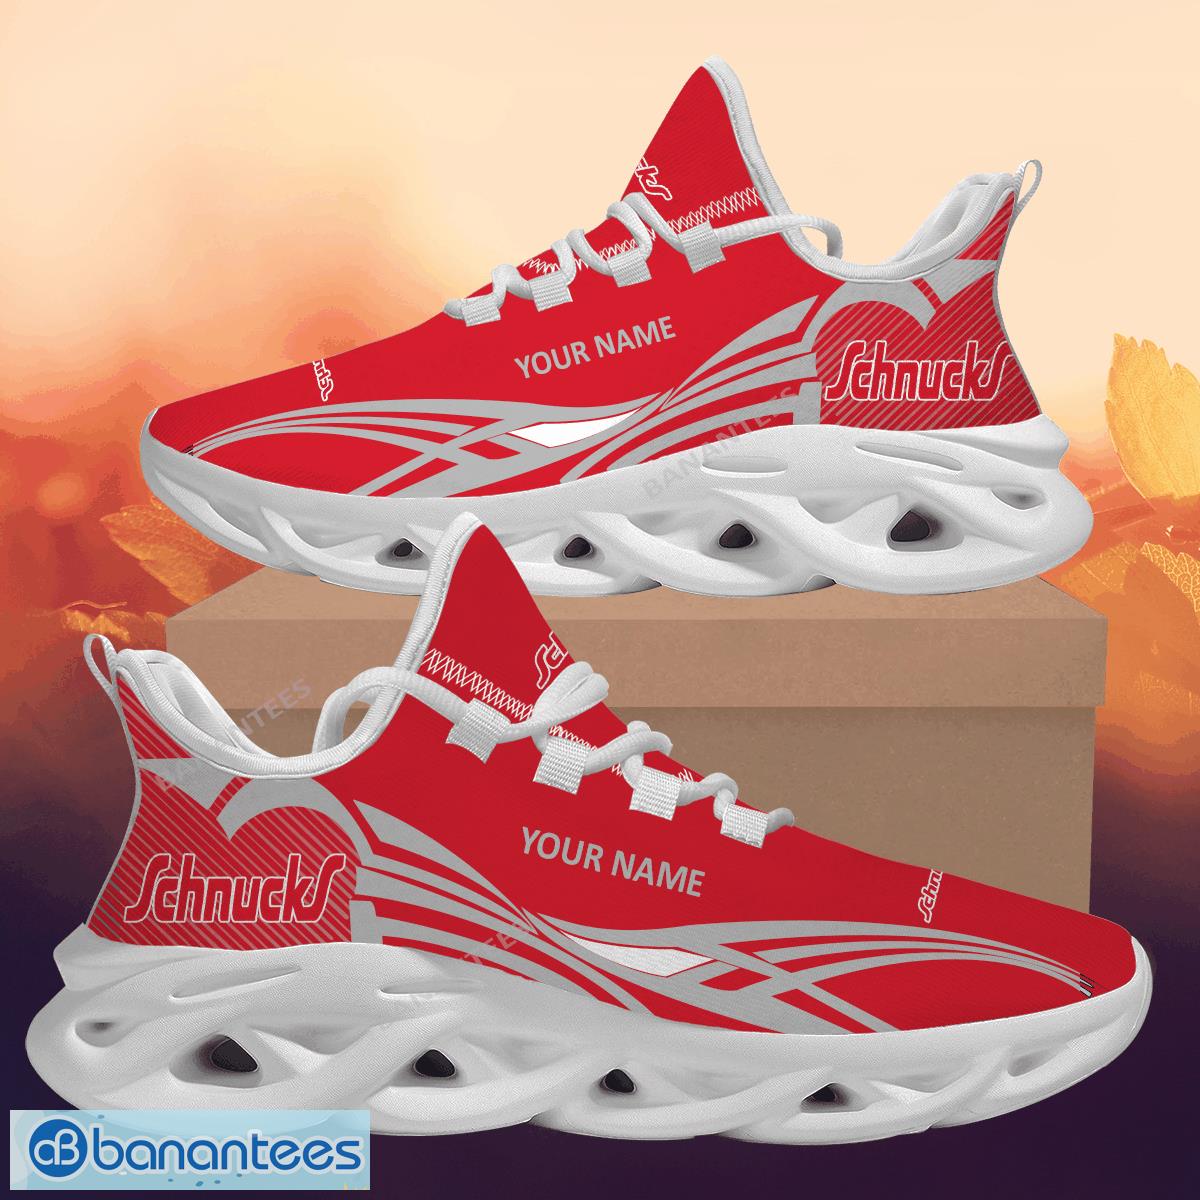 https://image.banantees.com/2024/01/schnucks-max-soul-shoes-brand-personalized-for-men-women-sports-sneakers-gift-1.jpg